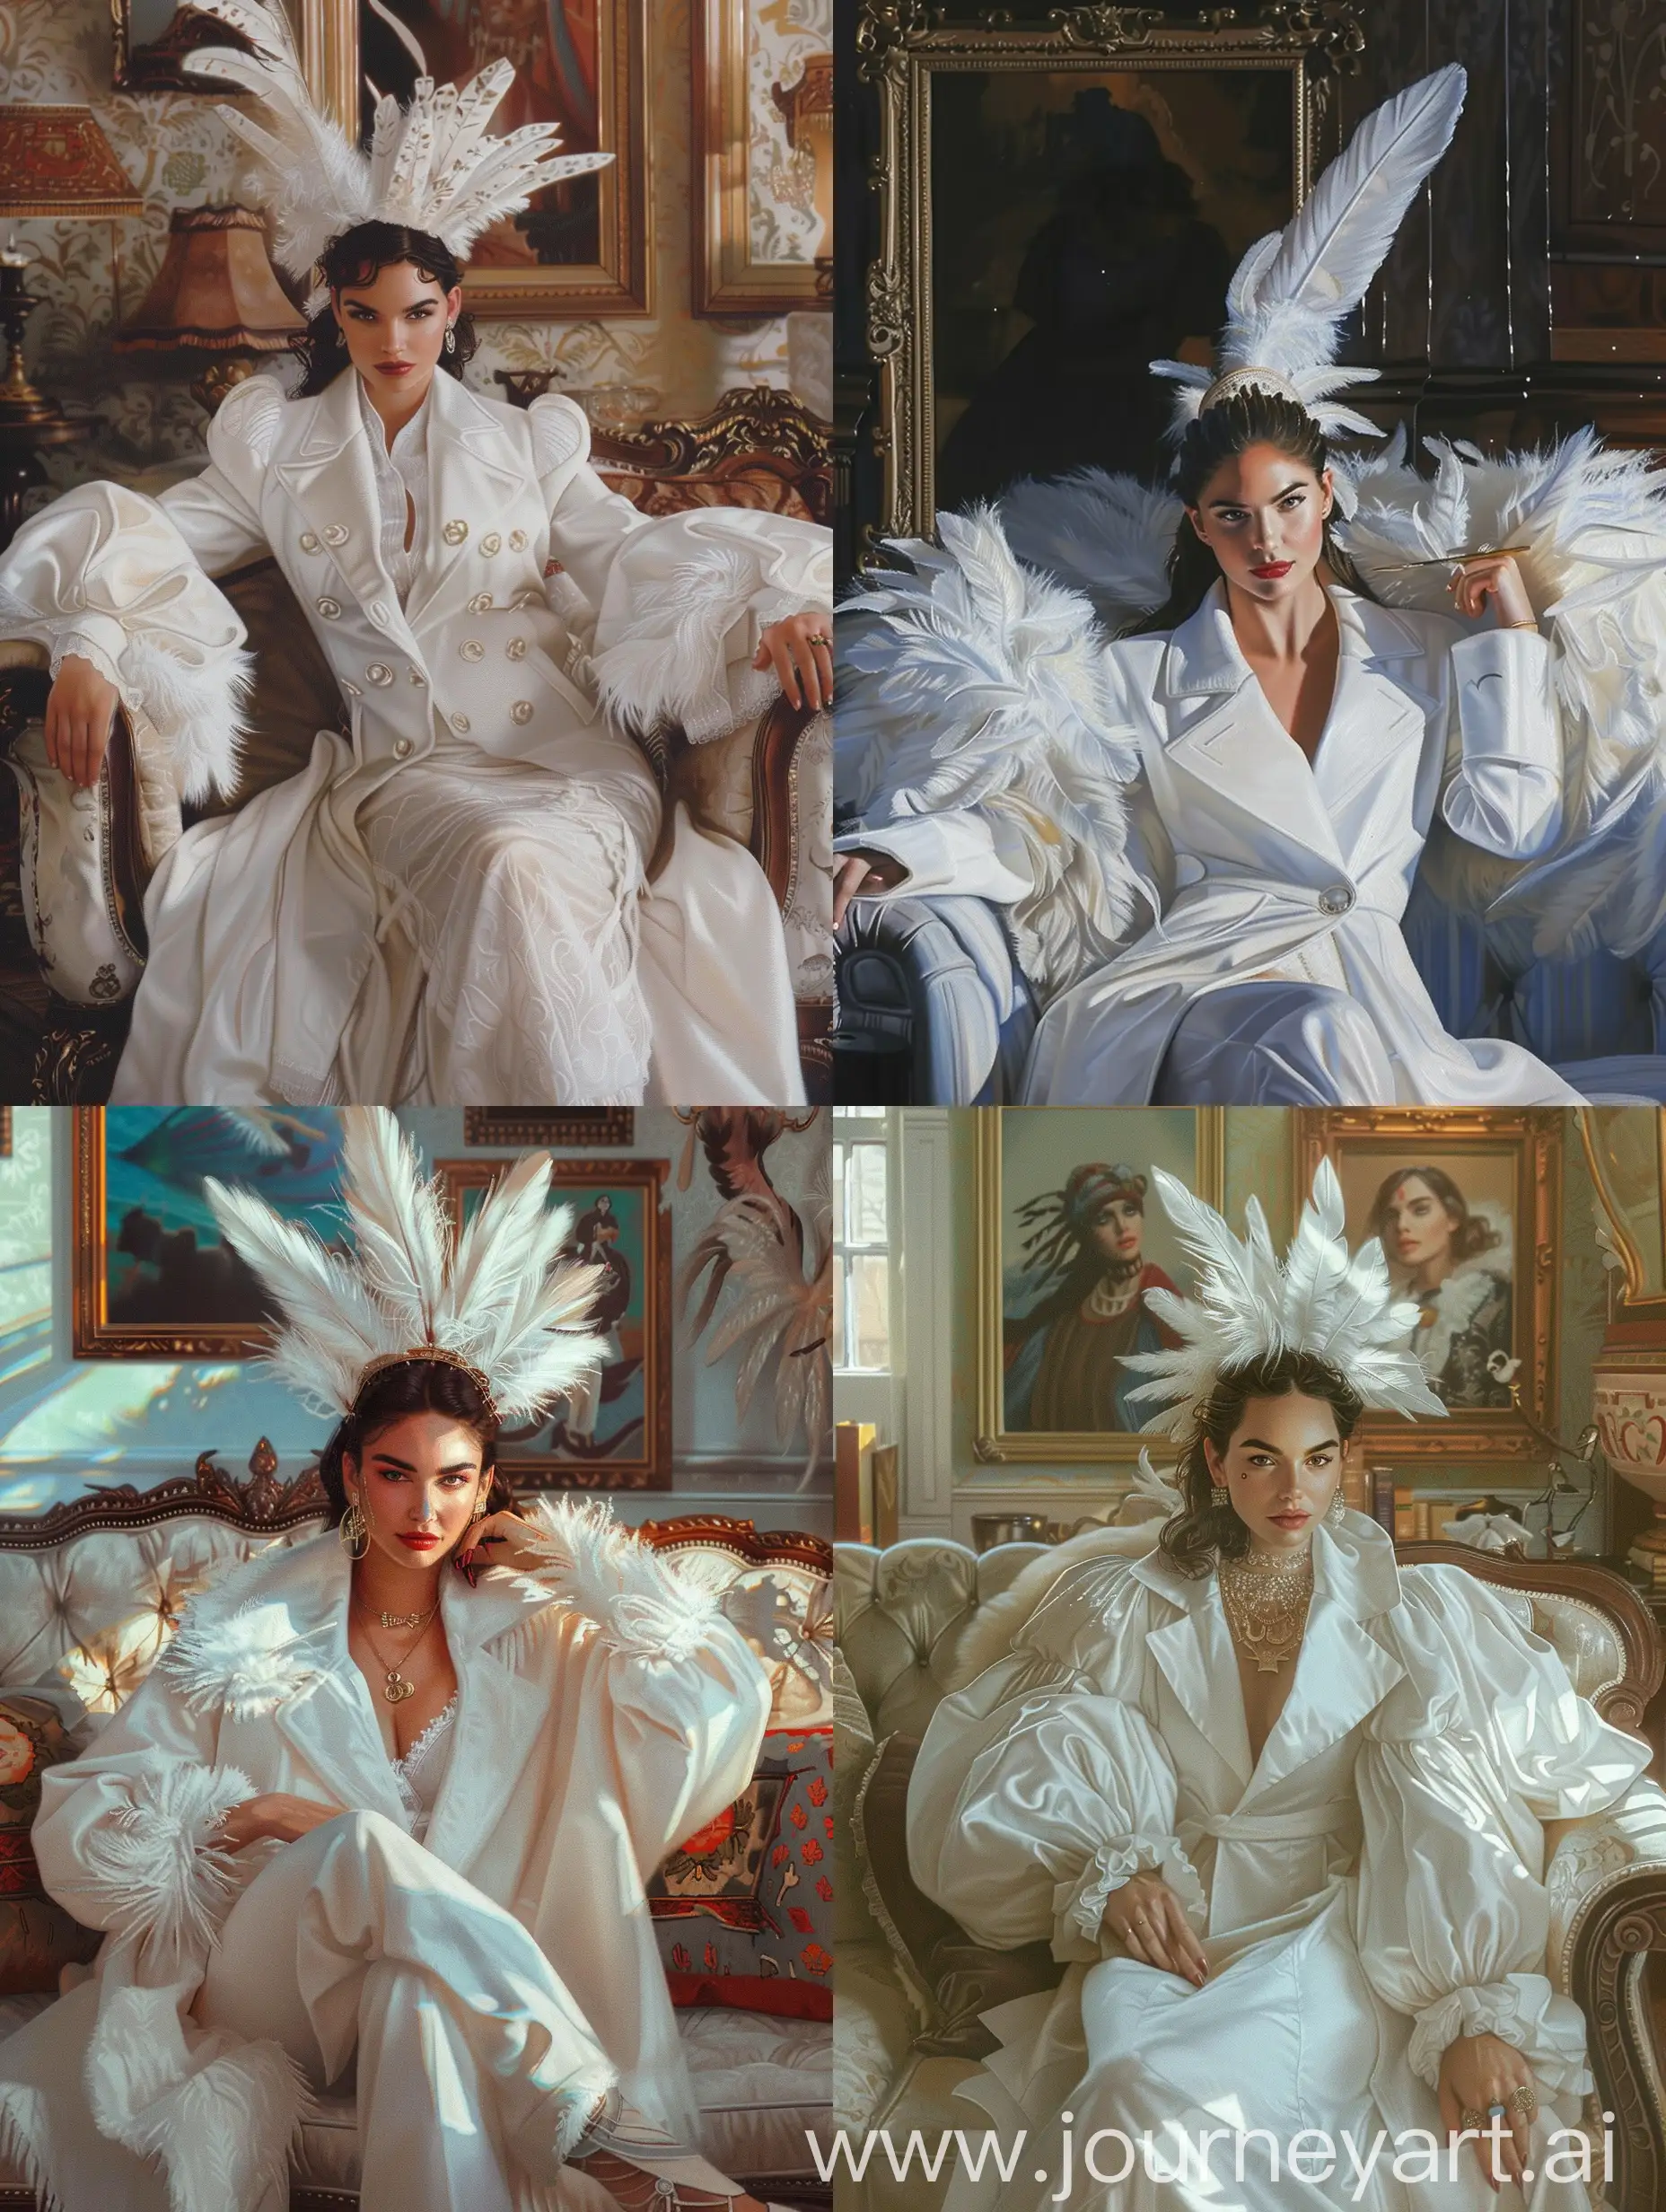 Shade woman in white coat sitting on couch, massive boho style sleeves, perfect face, feathers on her head, looks like gal gadot, dressed in white, very detailed, morning glow, dressed oil painting, airbrush, comic book. V6